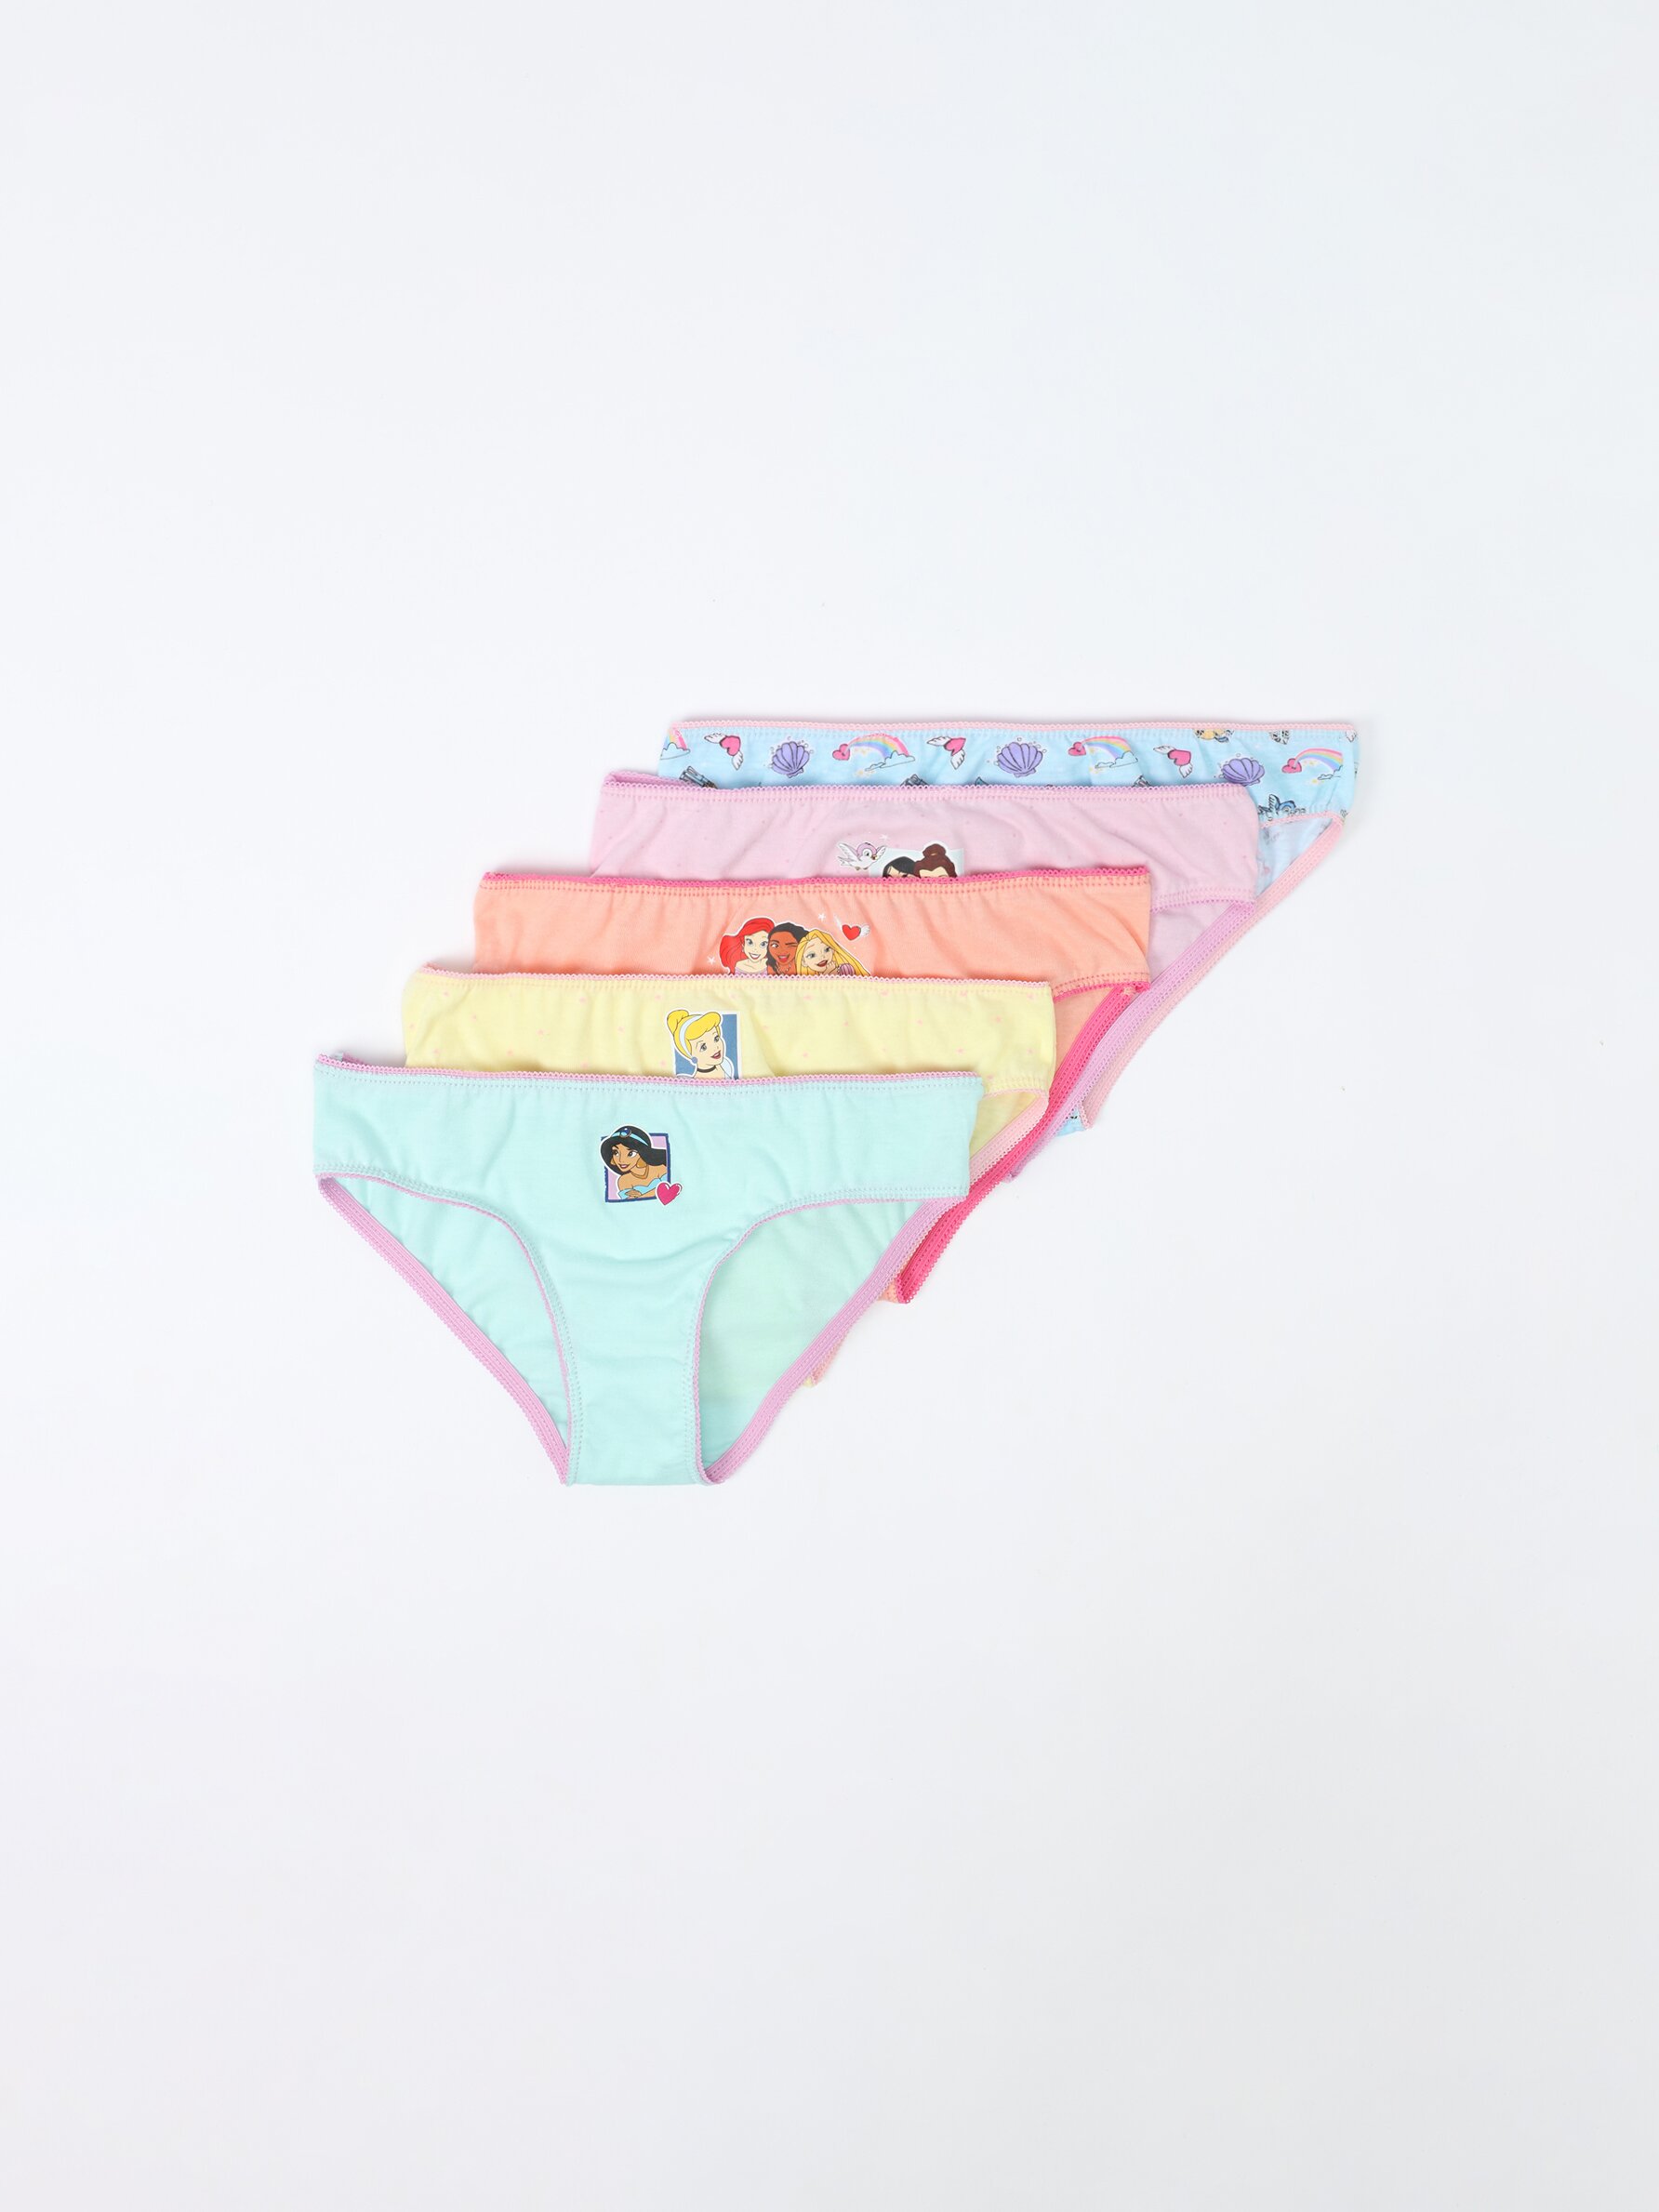 5-pack of ©Disney Princesses briefs - Collabs - ACCESSORIES - Girl - Kids 